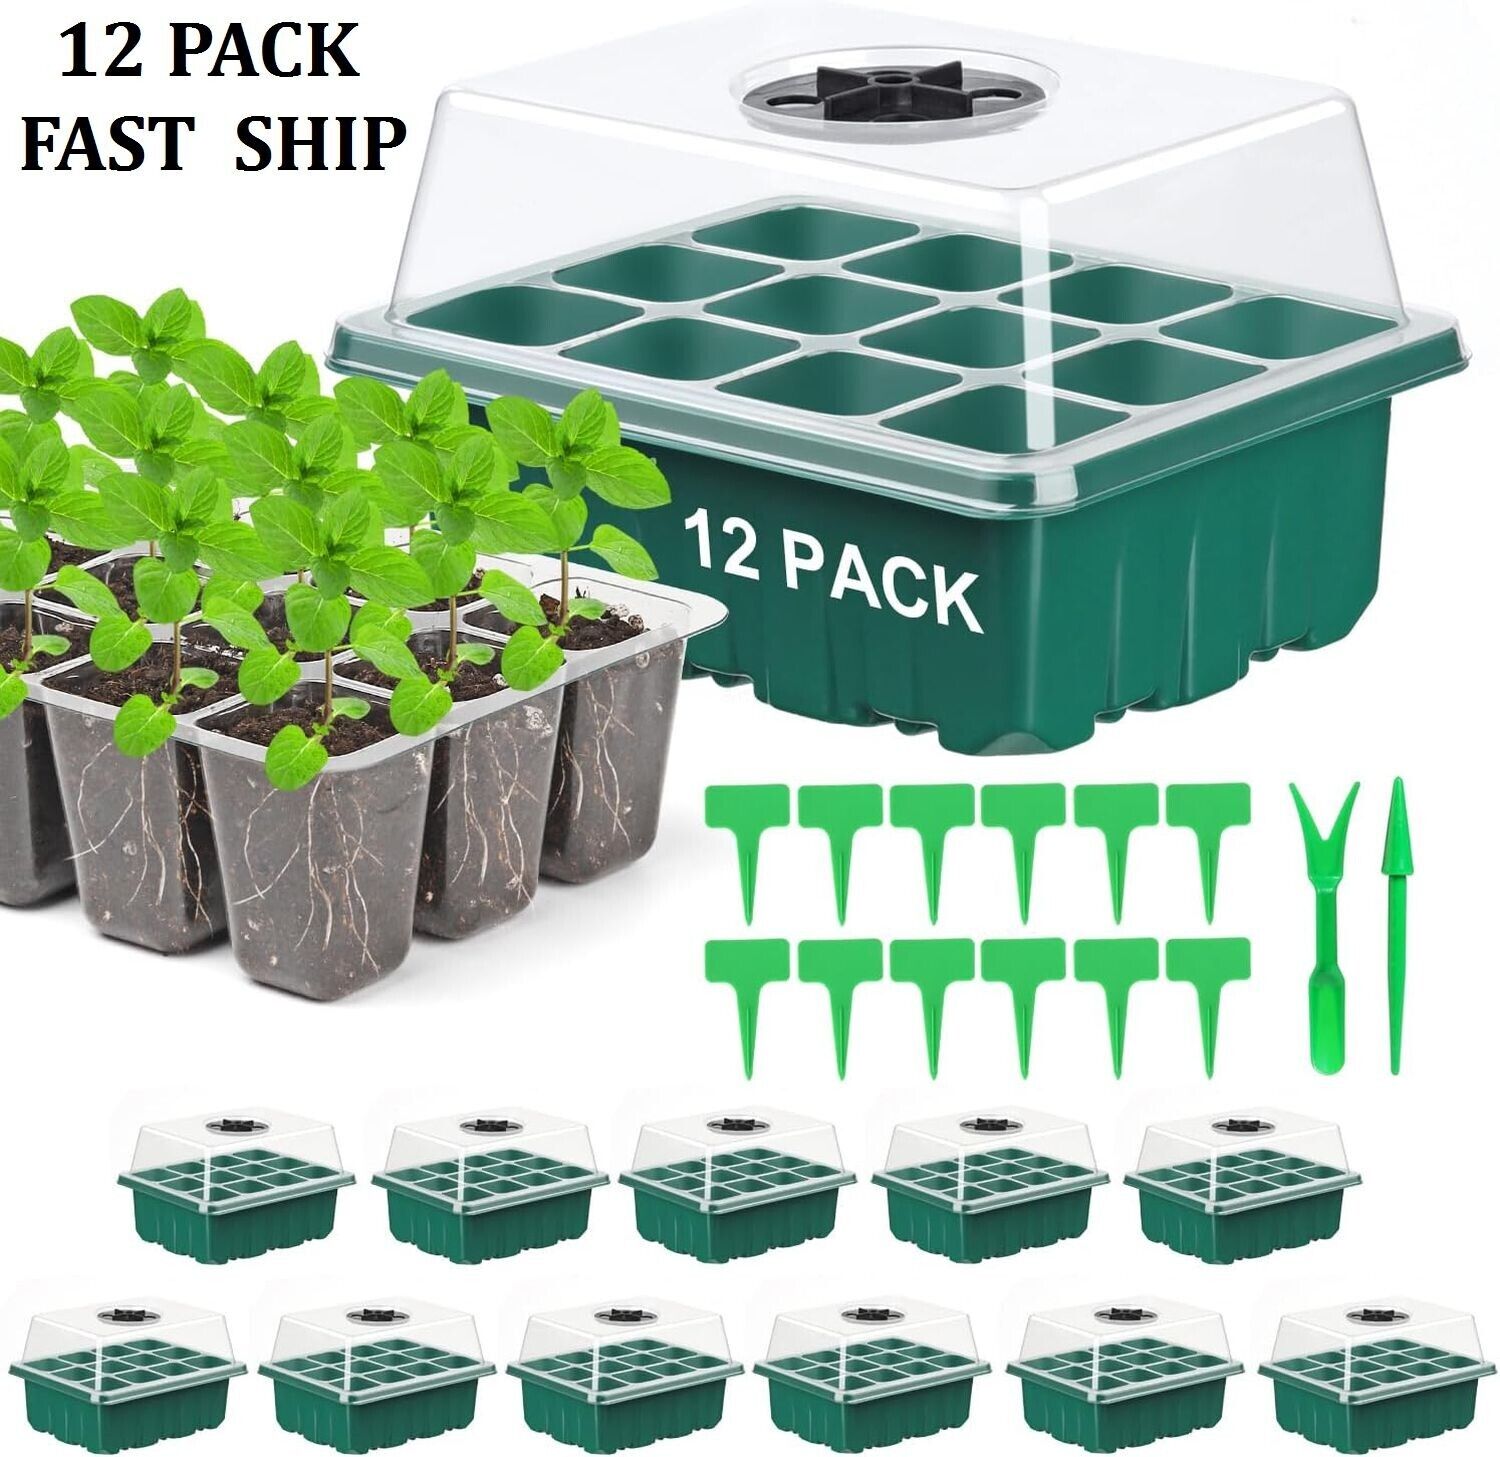 12 Packs Seed Starter Trays Seedling Tray Humidity Adjustable Kit with Dome